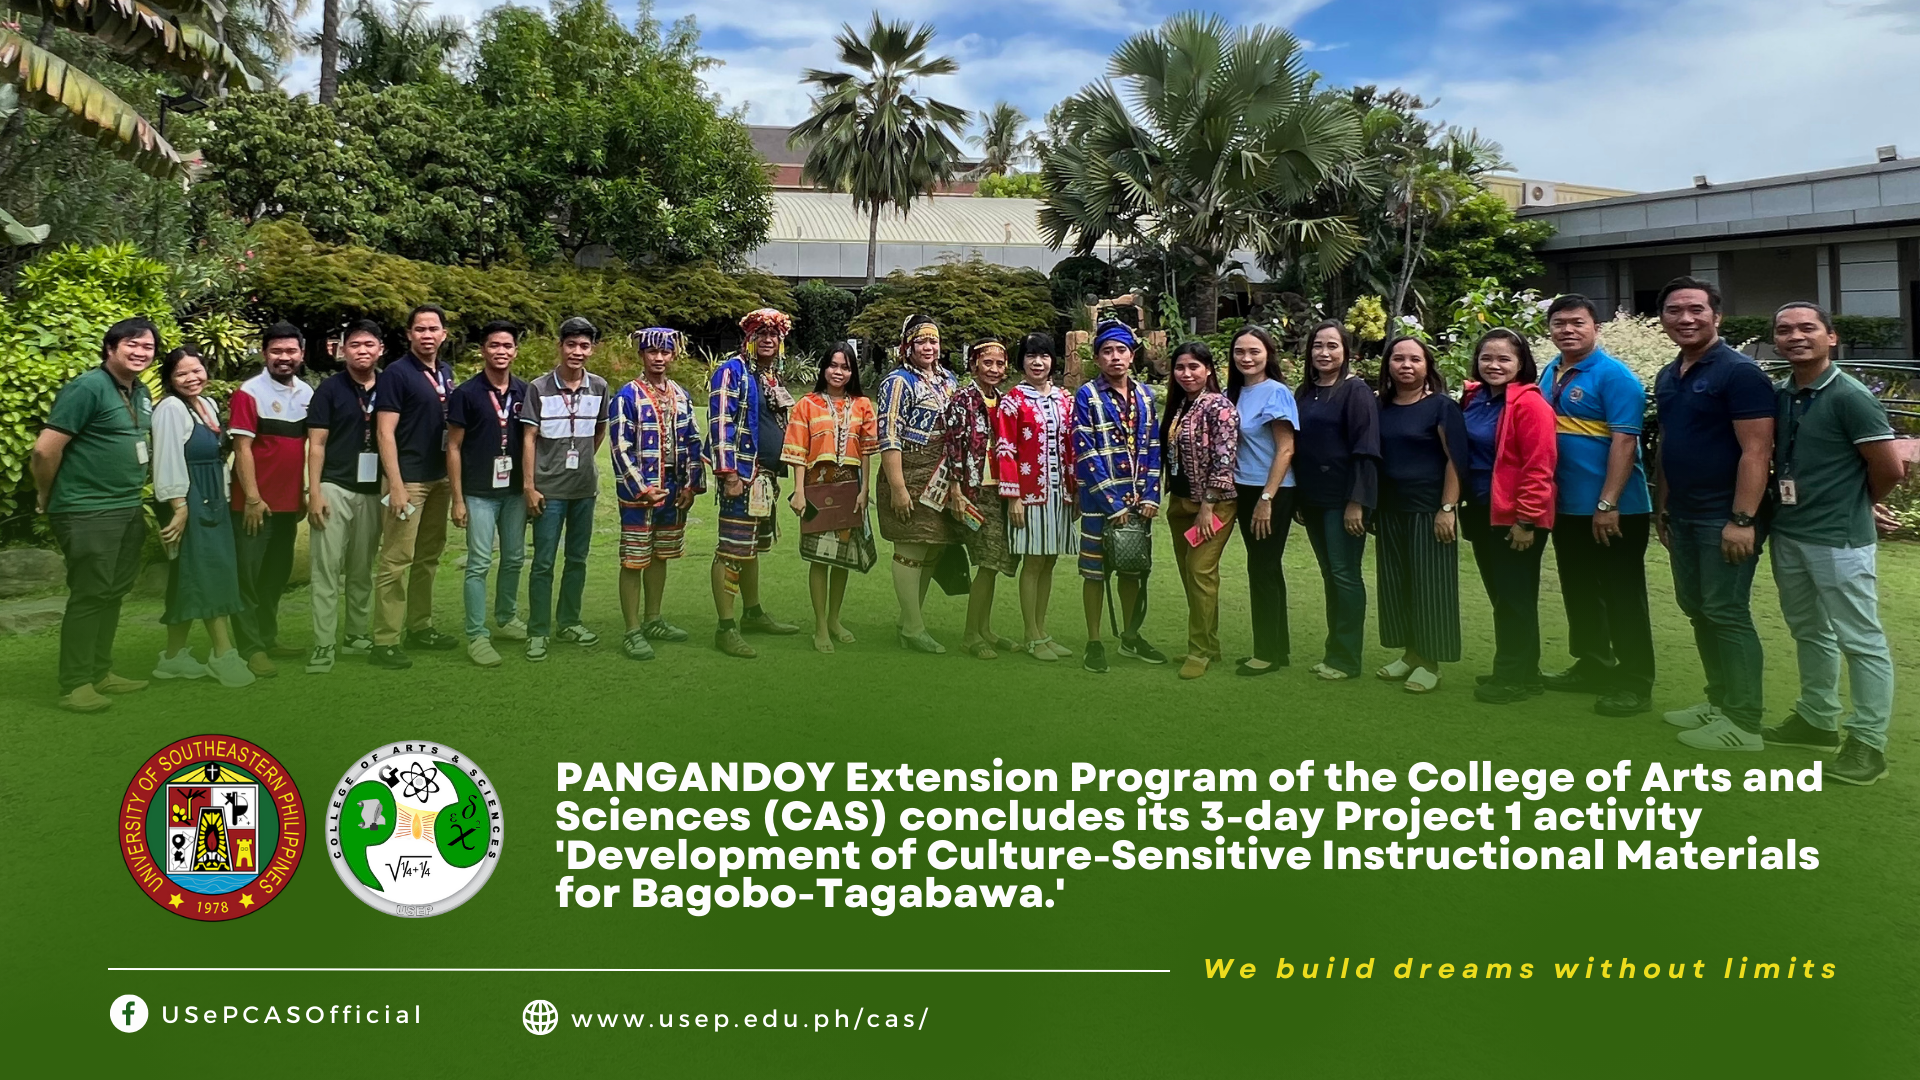 USeP CAS PANGANDOY Extension Program Concludes Its 3-day Project 1 Activity ‘Development of Culture-Sensitive Instructional Materials for Bagobo-Tagabawa’